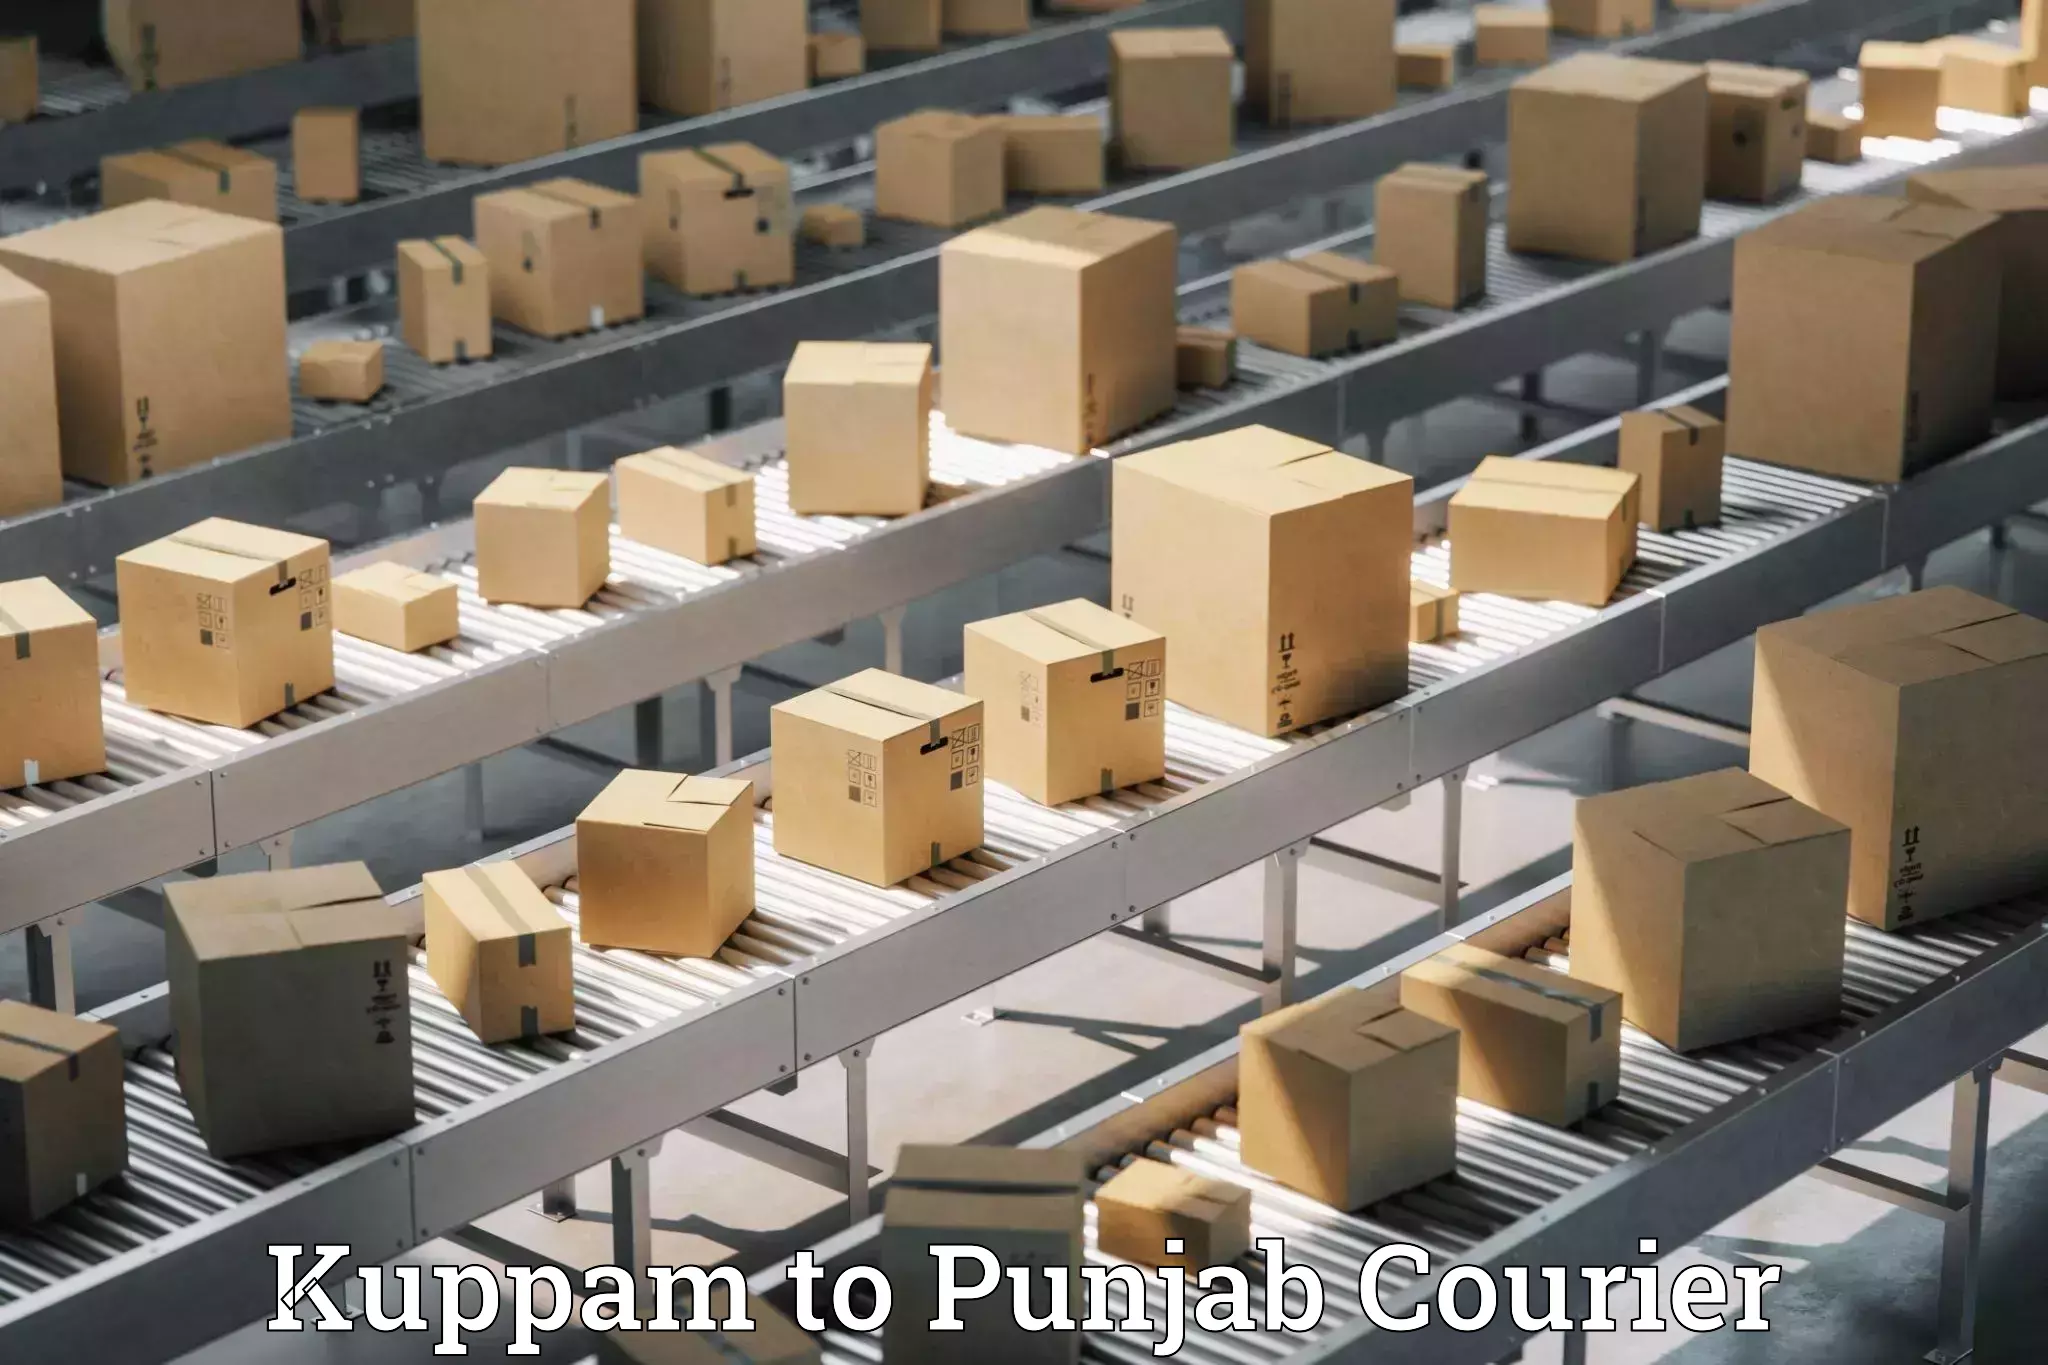 State-of-the-art courier technology Kuppam to Punjab